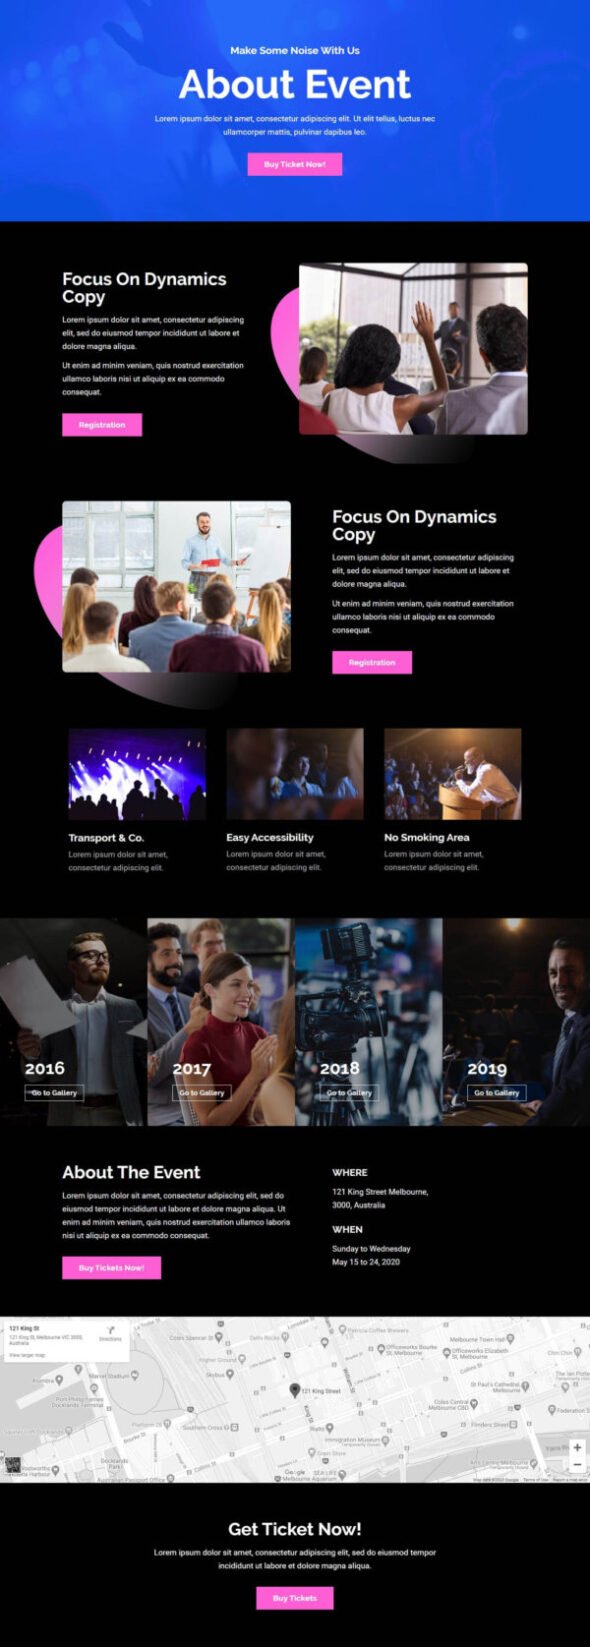 Eventico - Event & Conference Elementor Template Kit